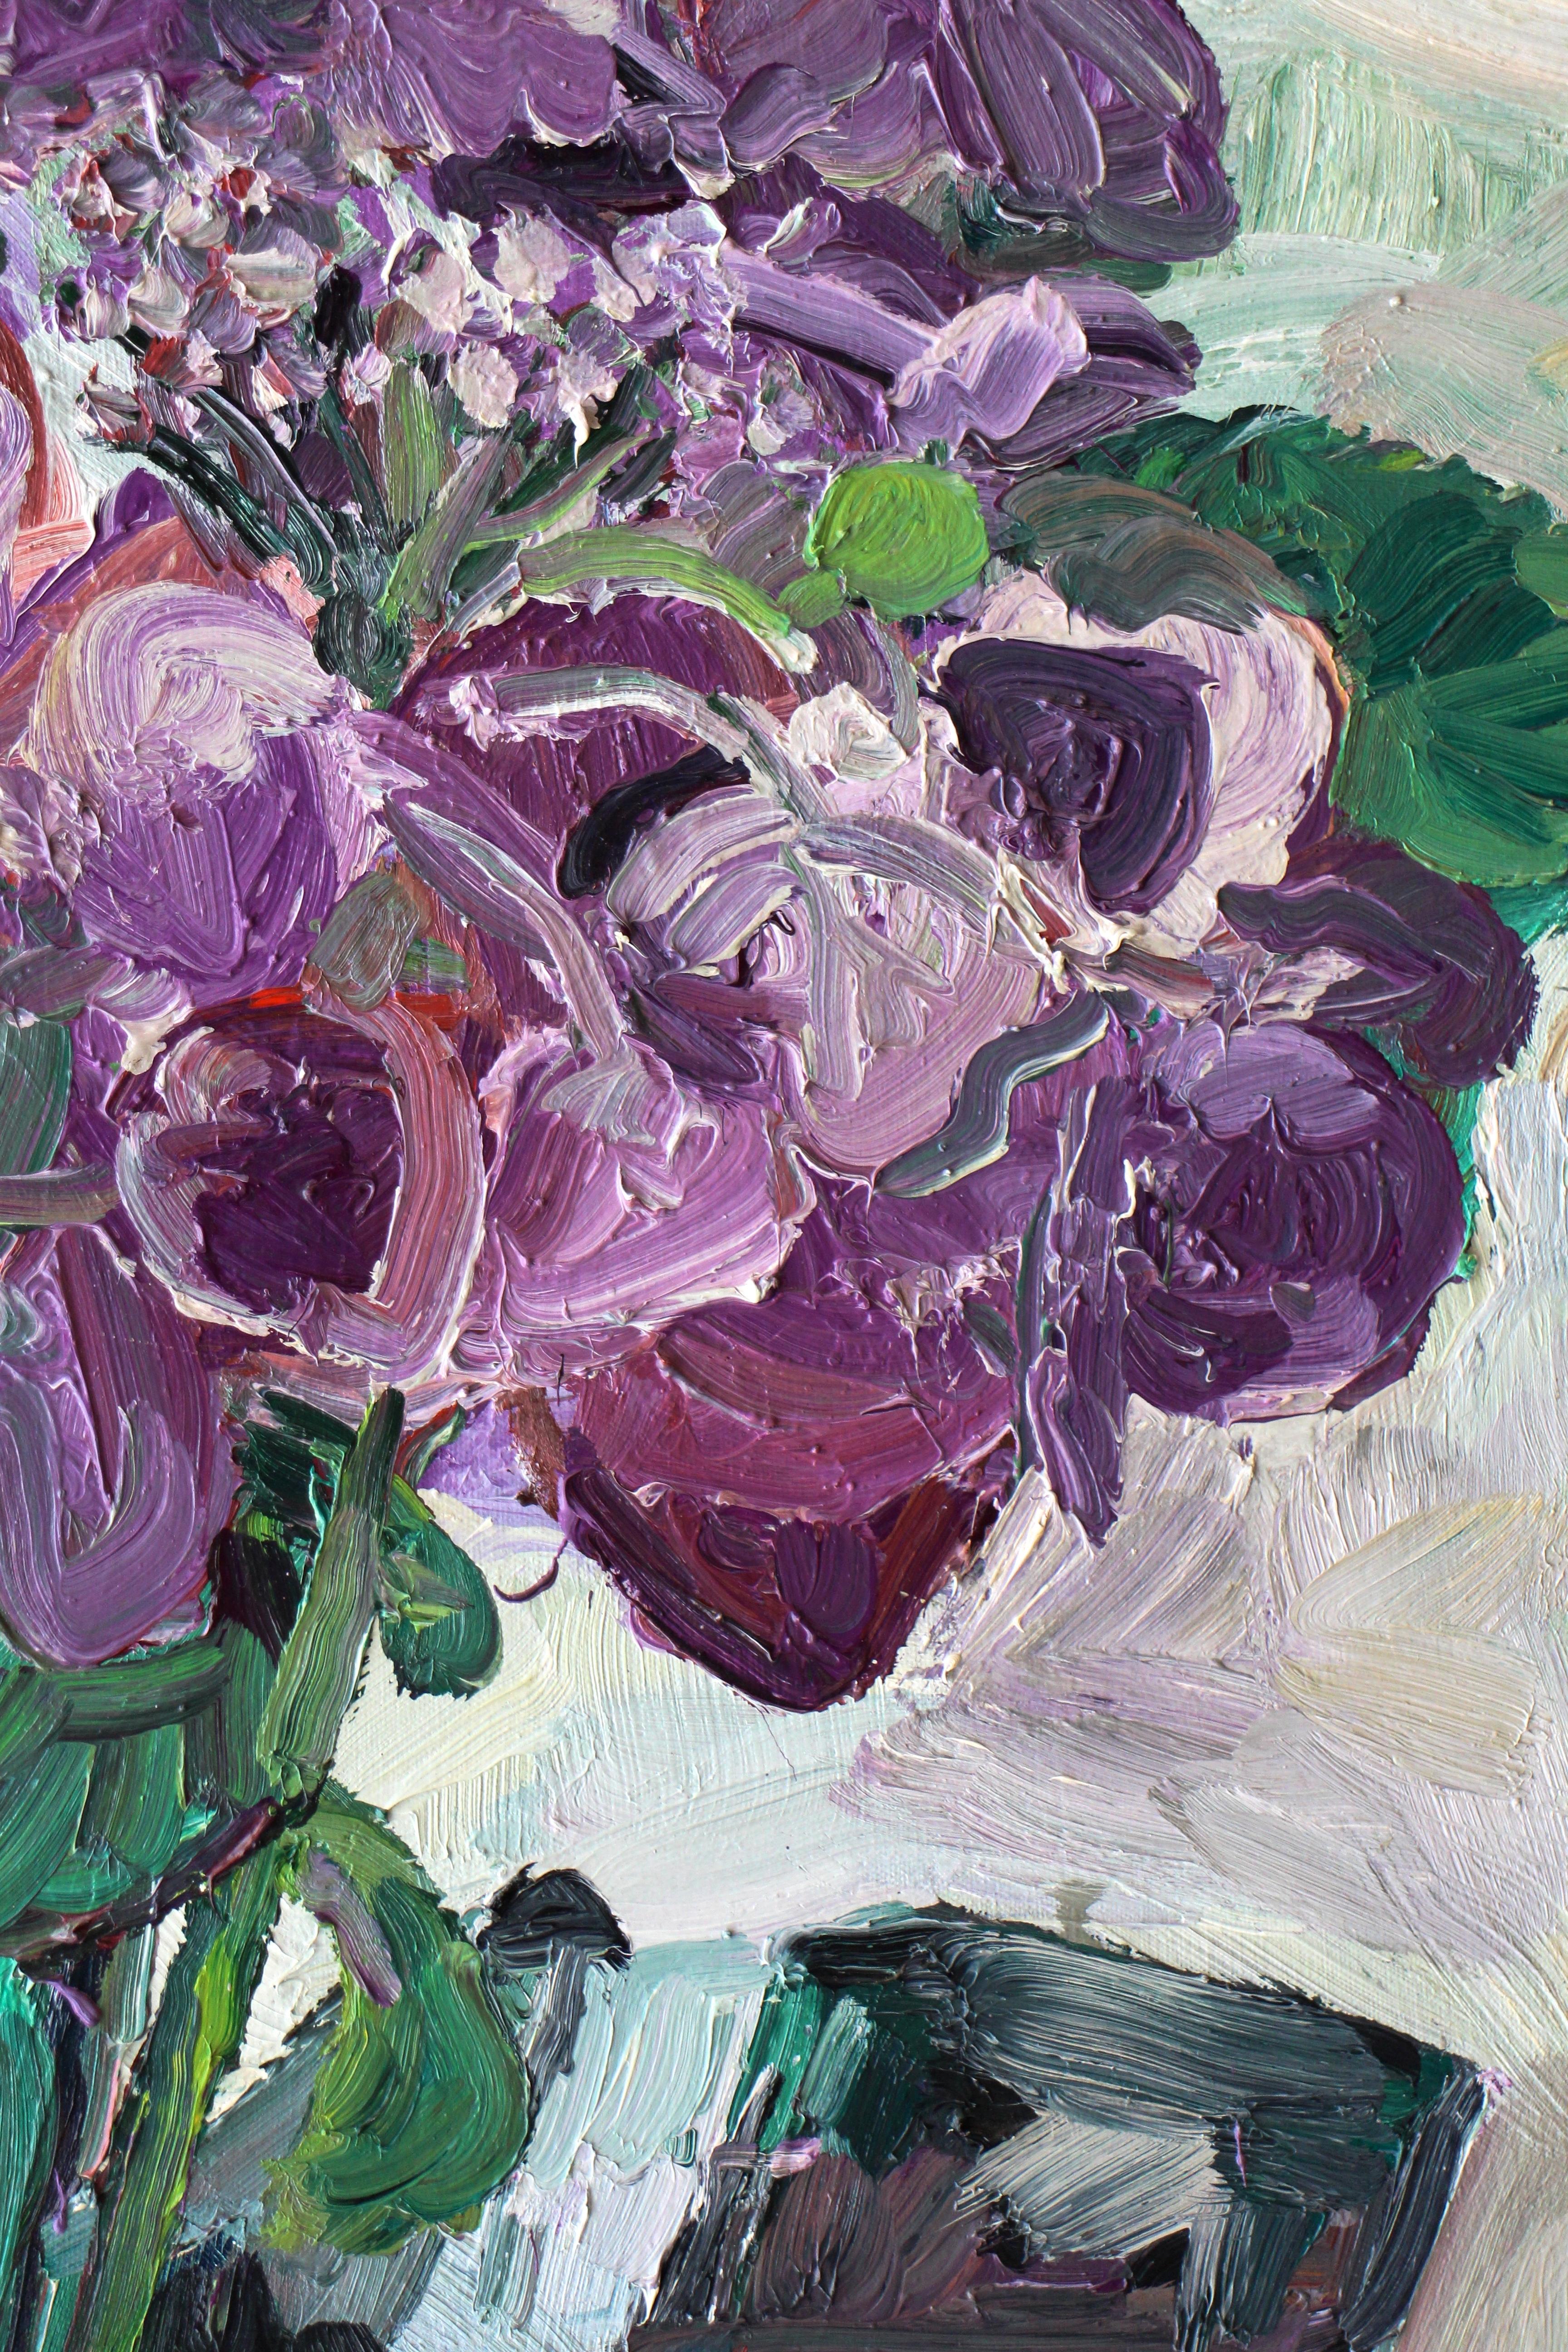 I painted this painting a number of years ago as part of a series I did on this Hydrangea plant I picked up at the local supermarket.  The painting is full of big, bold, colorful, thick brushstrokes.  :: Painting :: Impressionist :: This piece comes